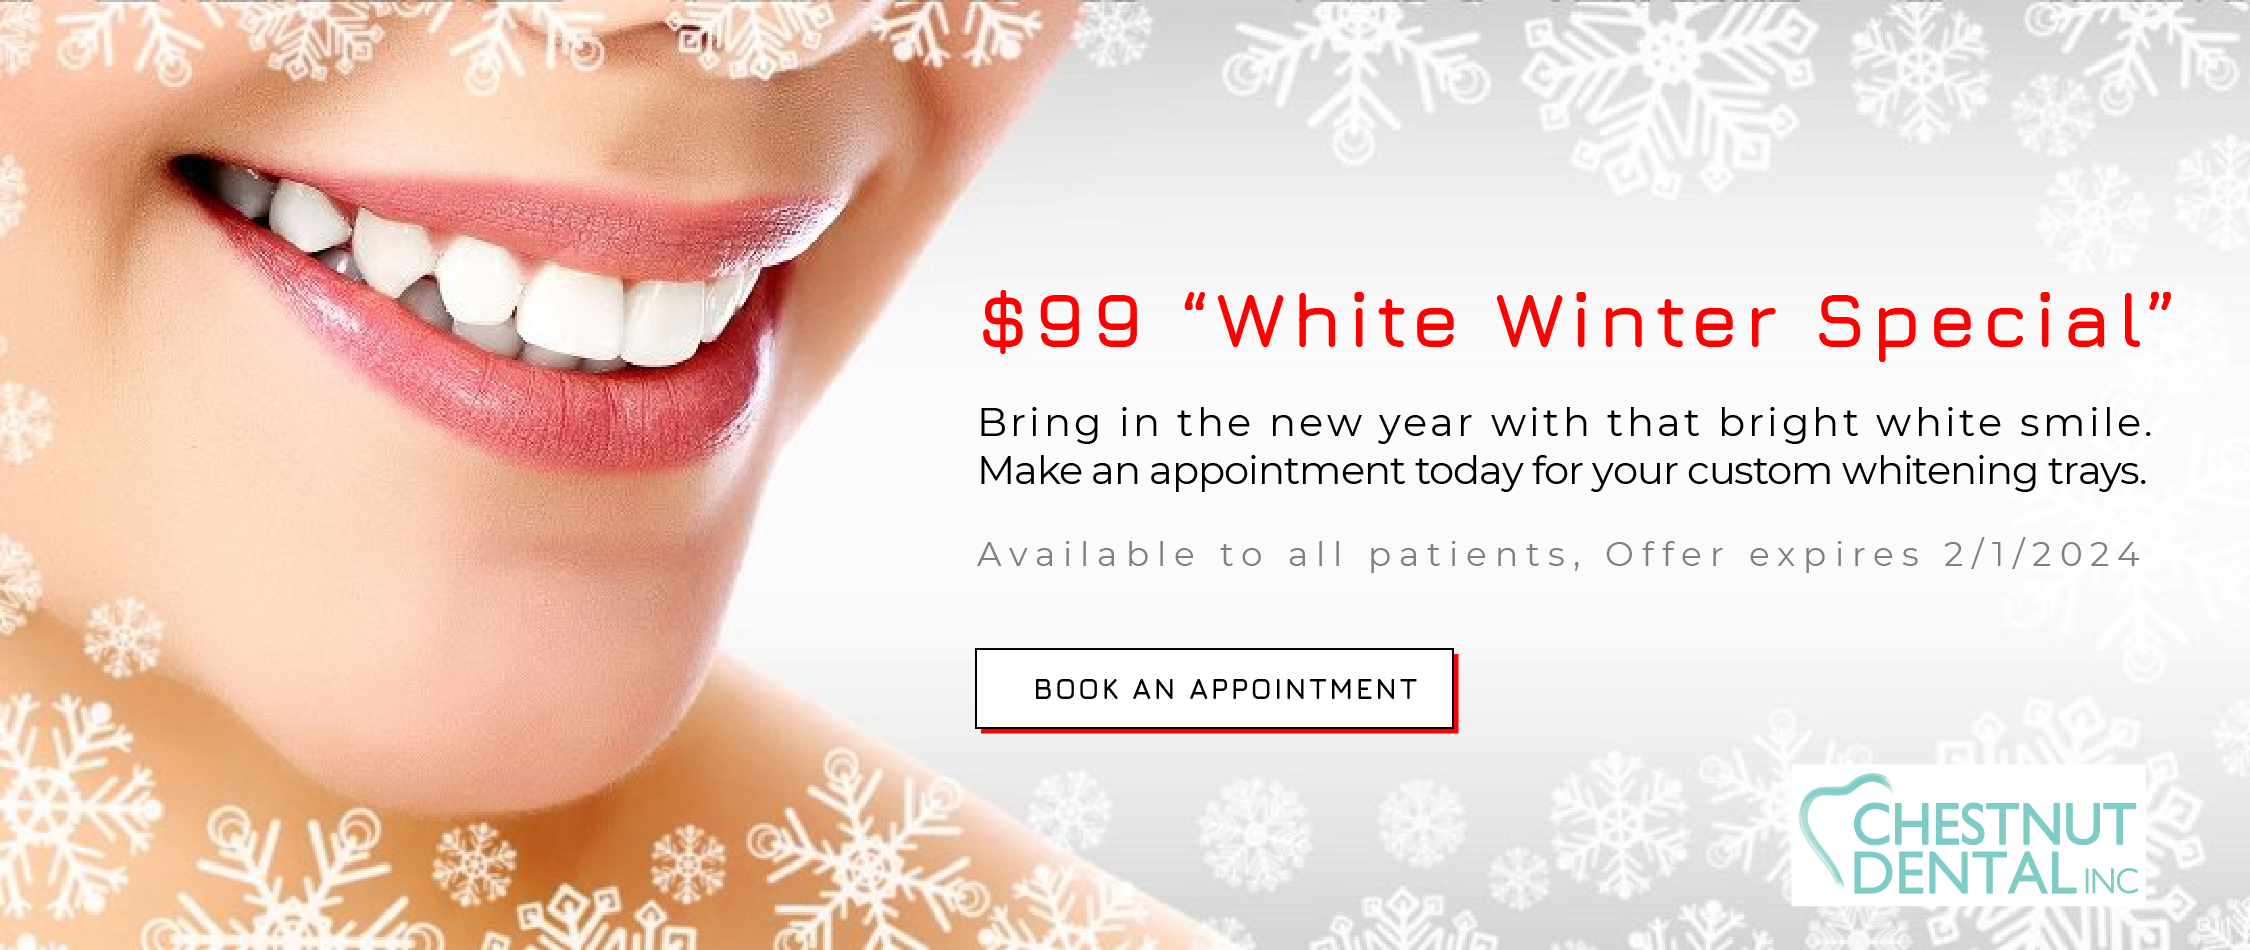 Chestnut Dental holiday teeth whitening special for Orange County and Long Beach patients